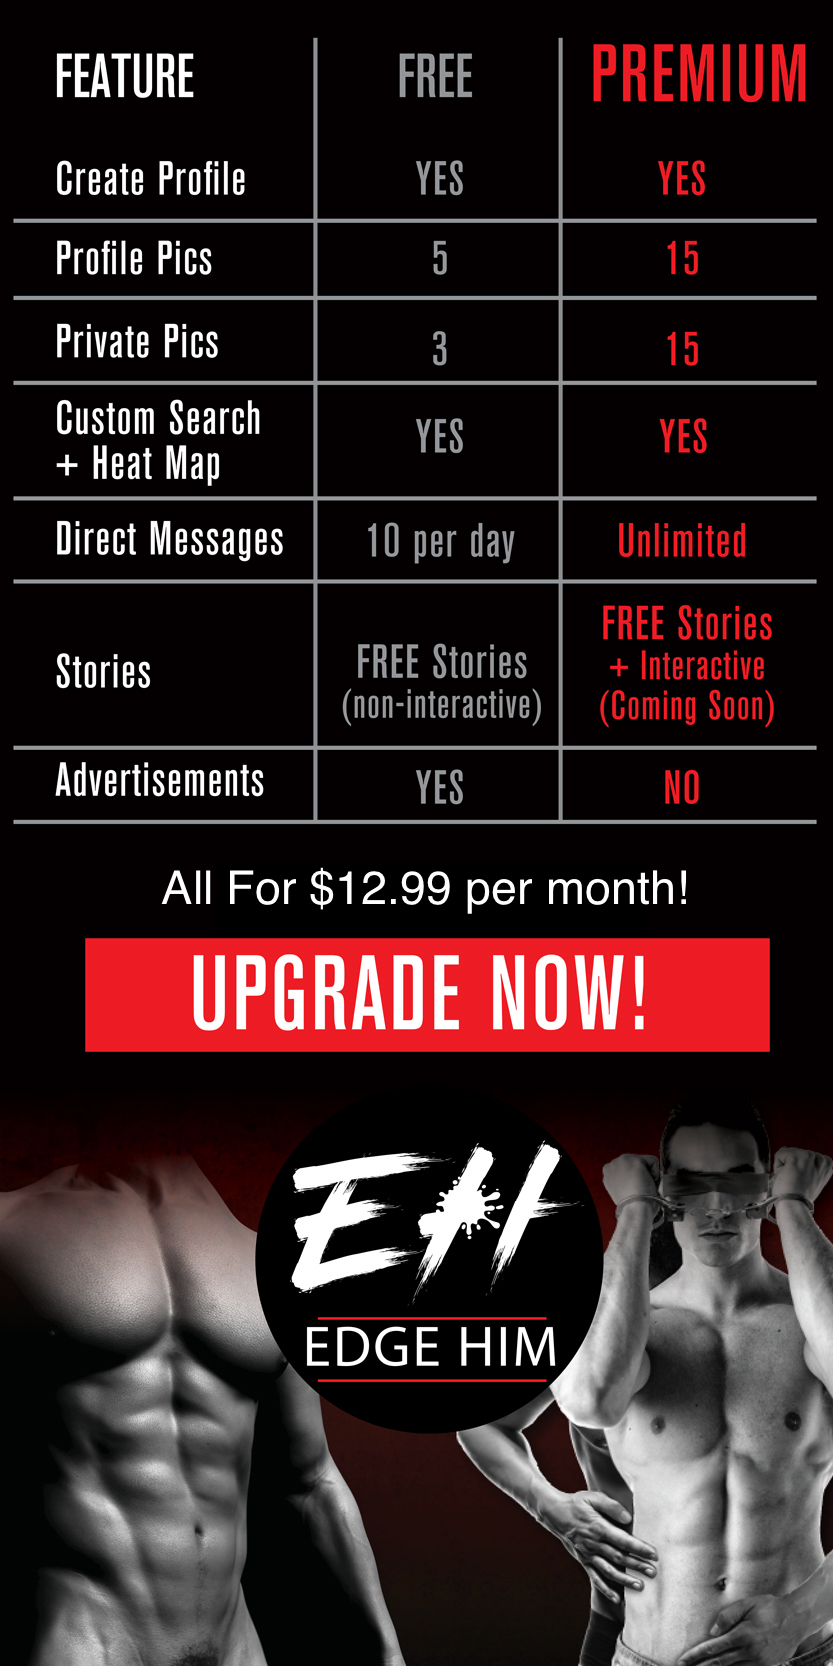 All for $12.99 per month. Upgrade Now!